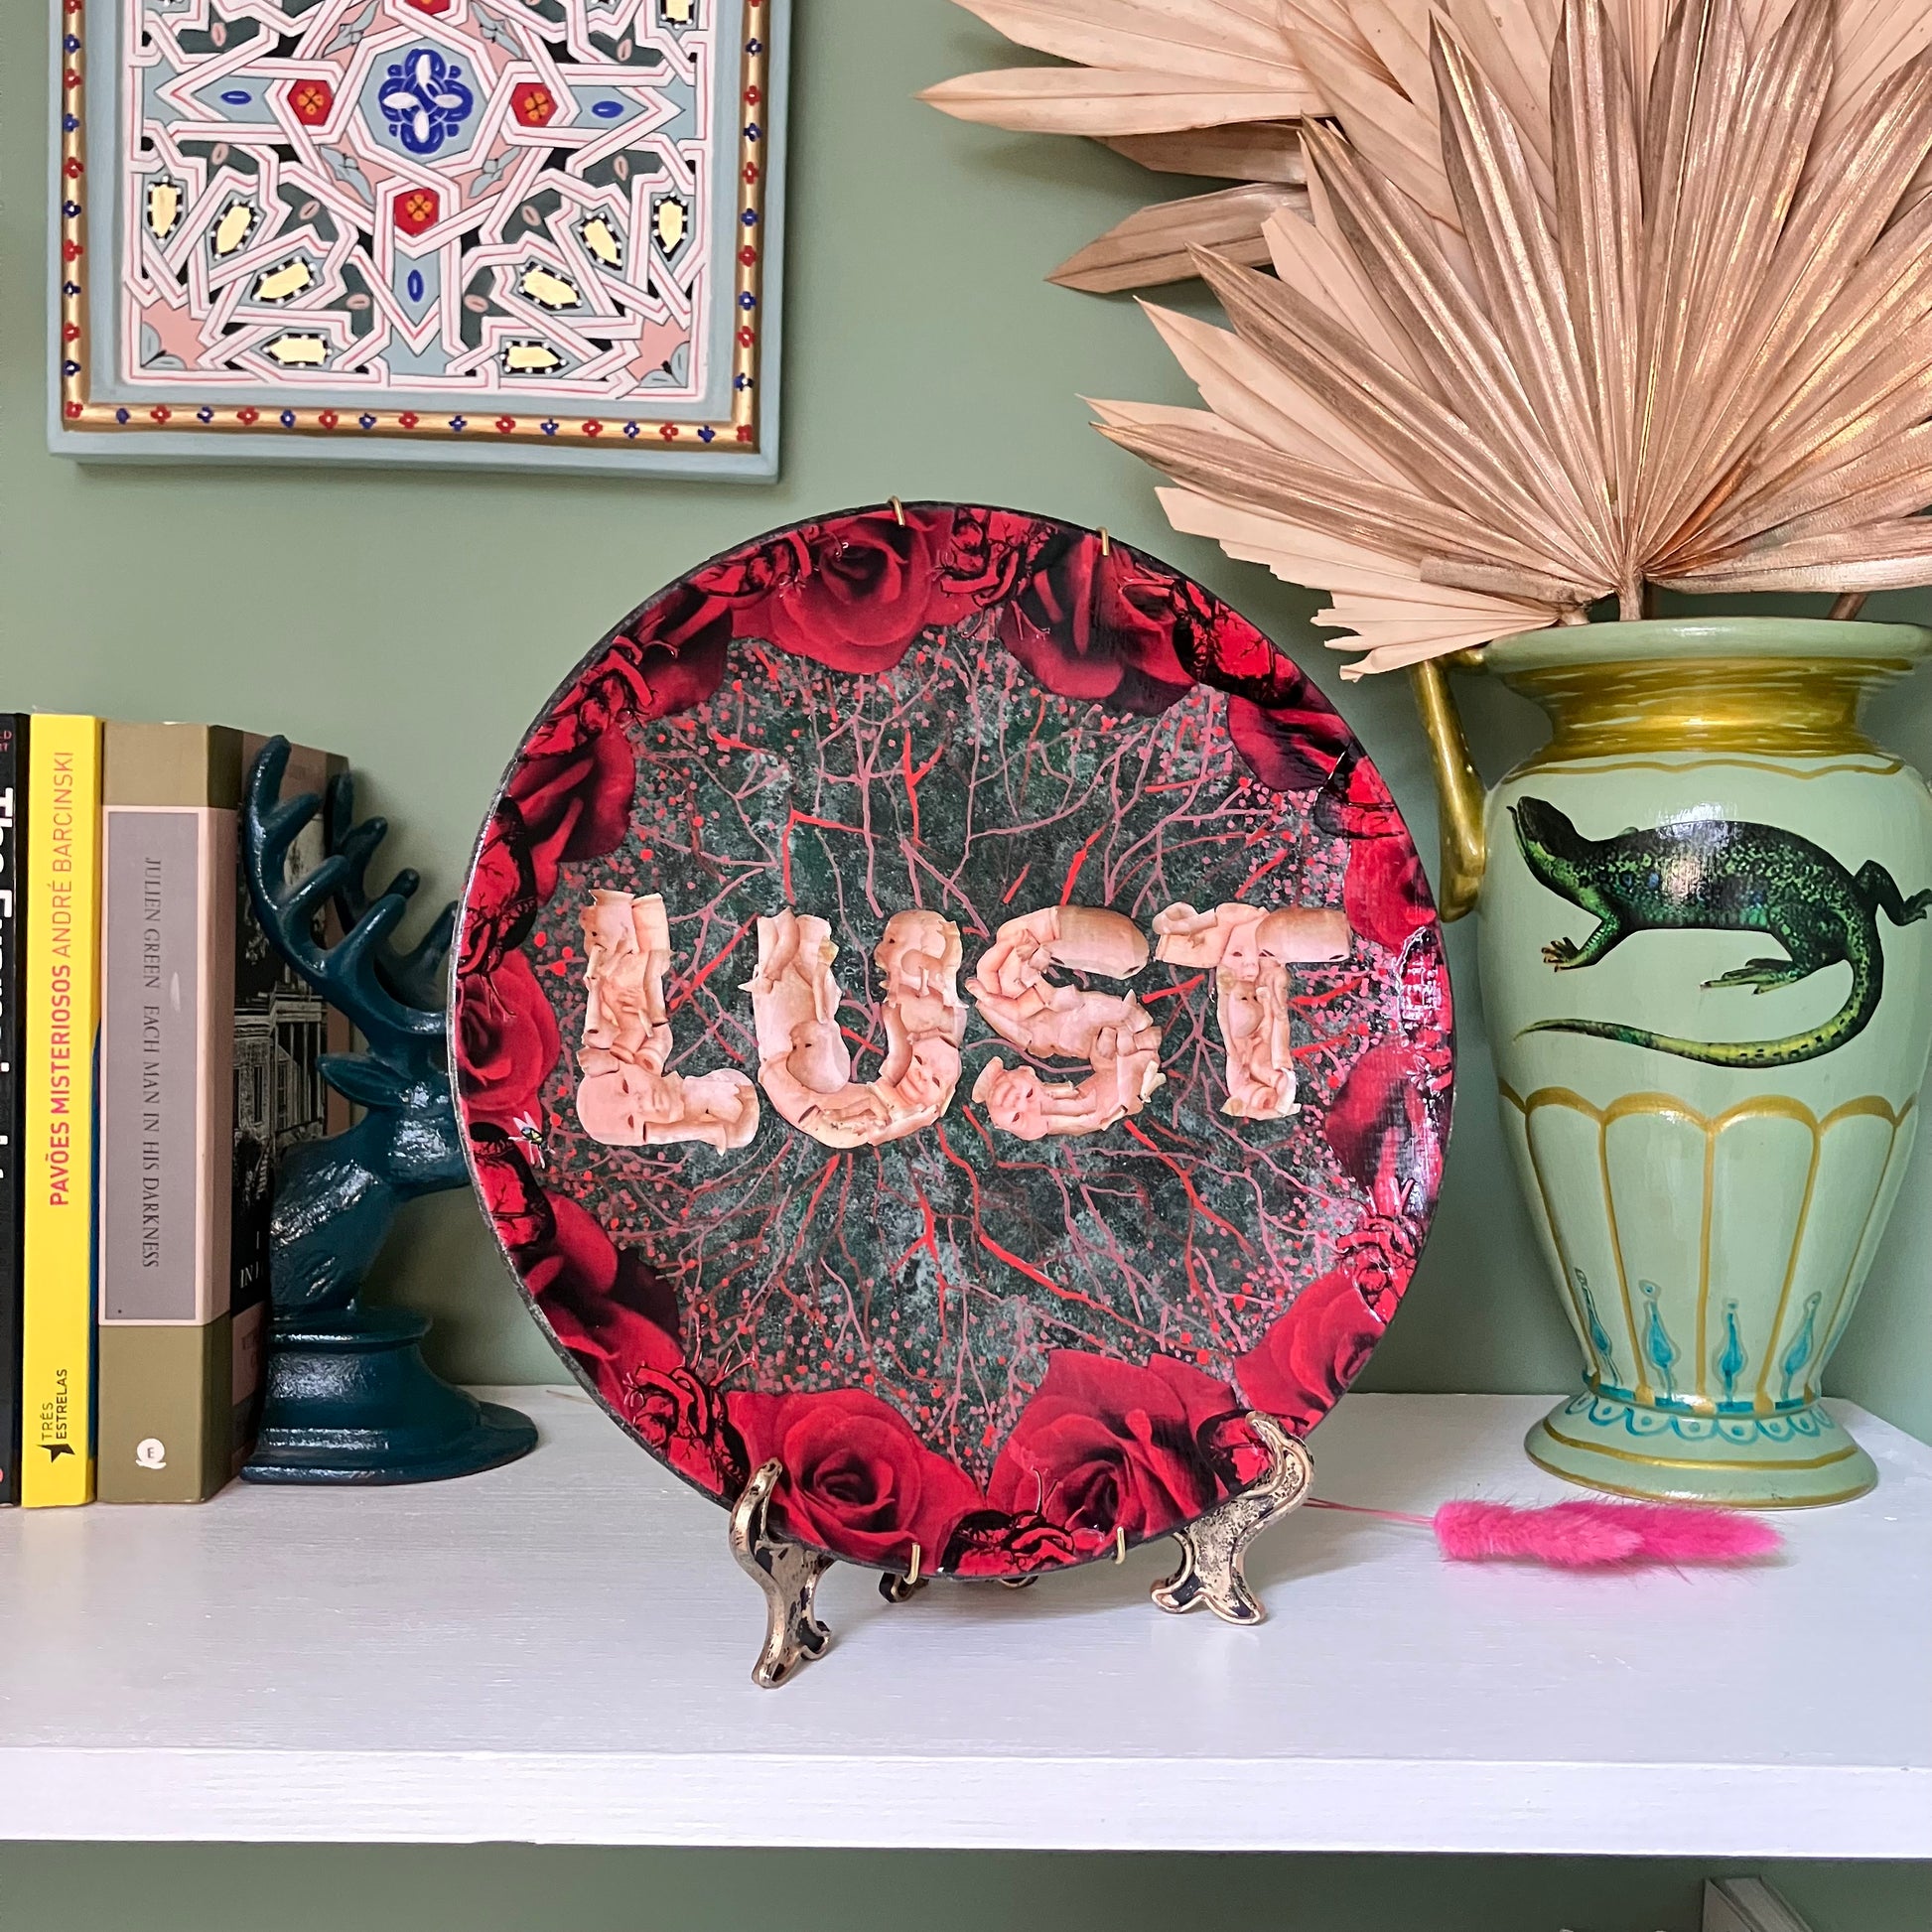 "Lust" Wall Plate by House of Frisson, featuring the word "lust" written with plastic doll parts, framed by red roses and anatomical human heart ,on a charcoal grey background with vein patterns. Plate on a plate stand resting on a shelf.